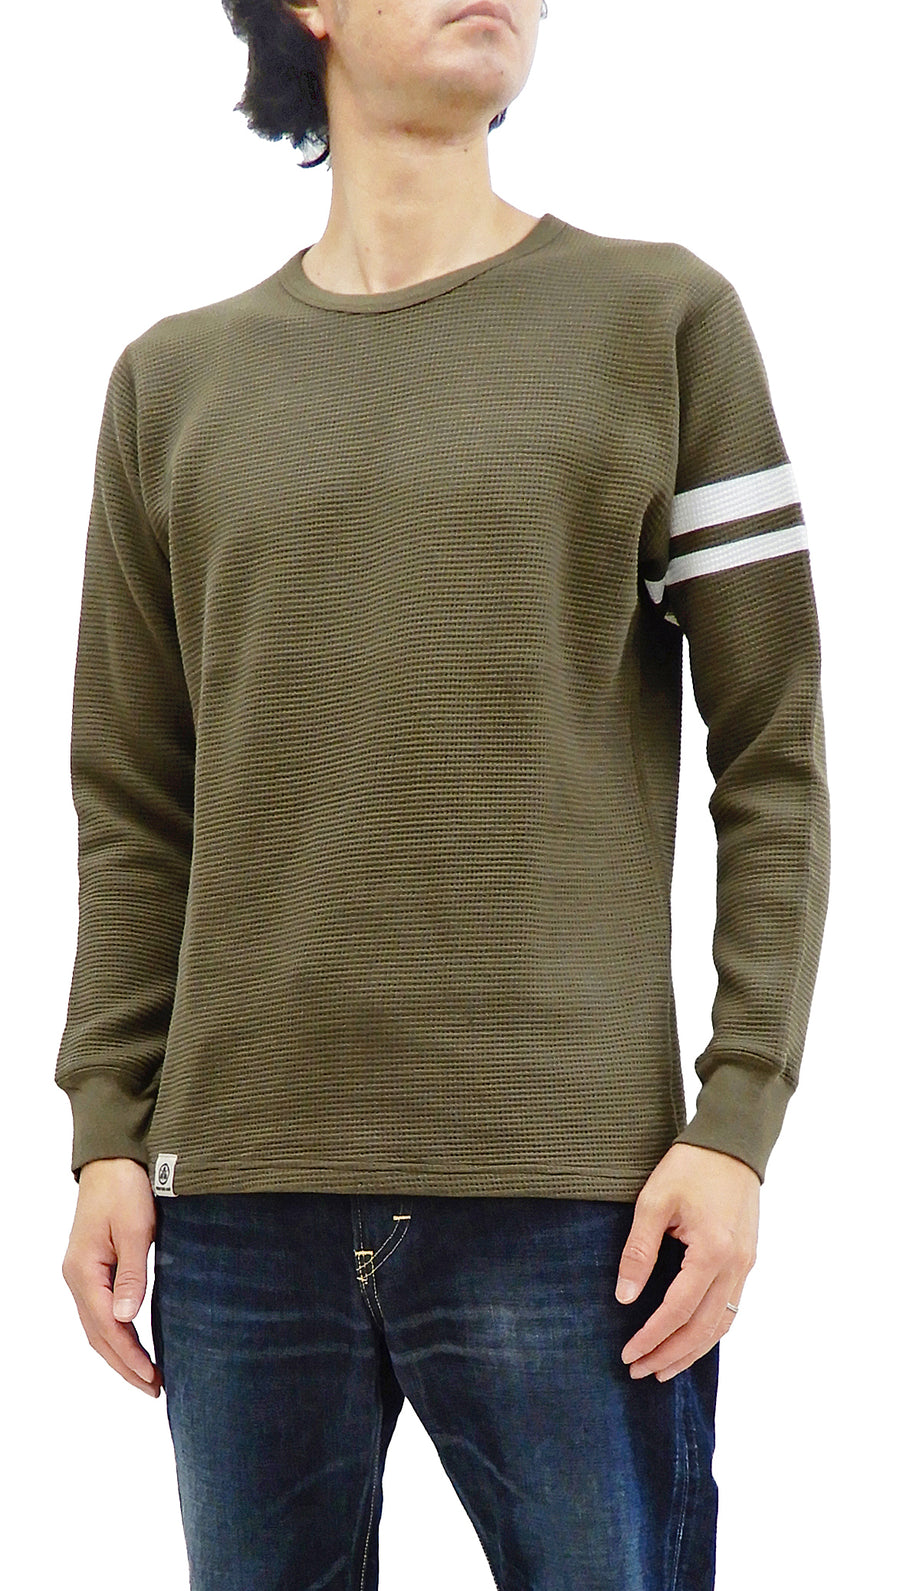 Momotaro Jeans Waffle Shirt Men's Long Sleeve Waffle-Knit Thermal T-Shirt with Stripe MZTS0079 OD Olive-Green